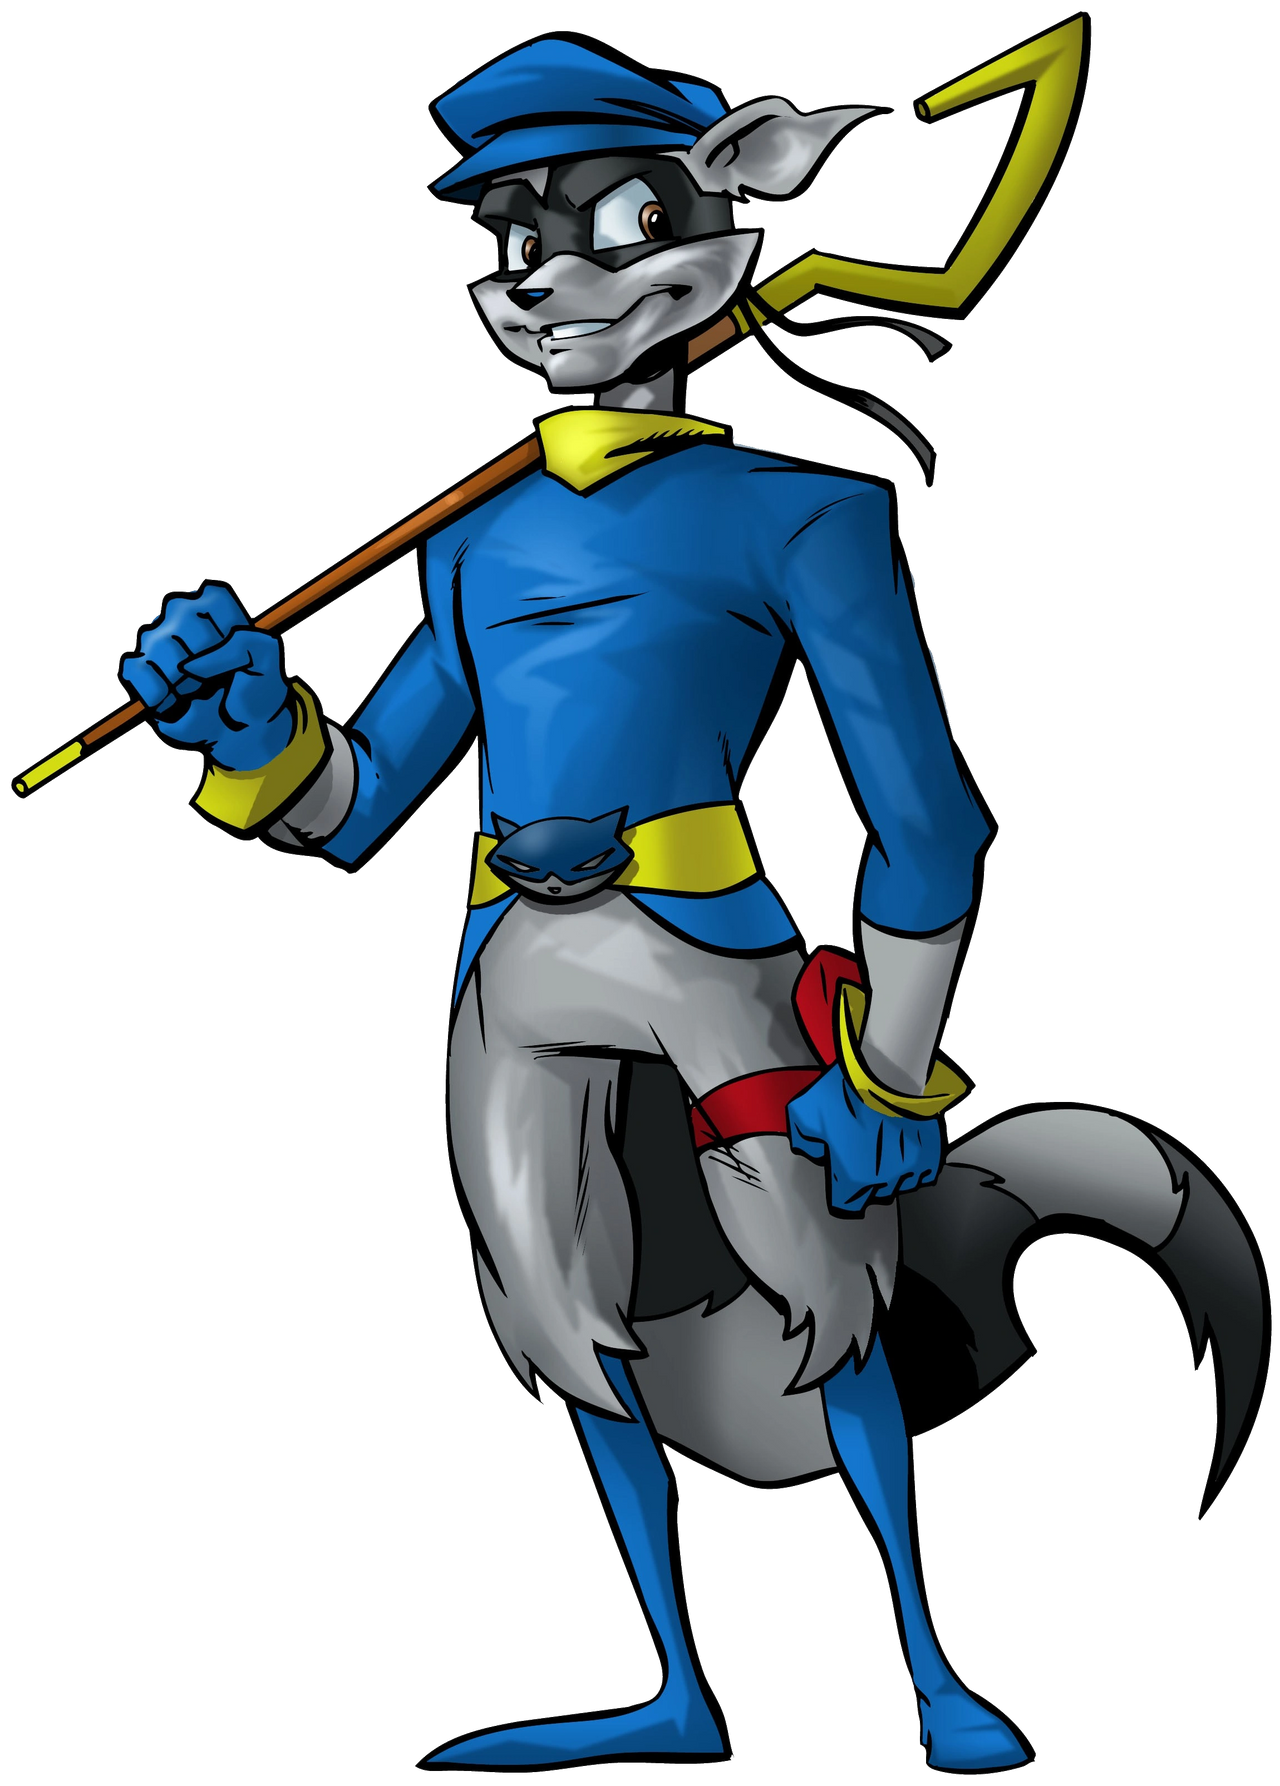 Sly 3: Honour Among Thieves - Sly Cooper - Triumph by